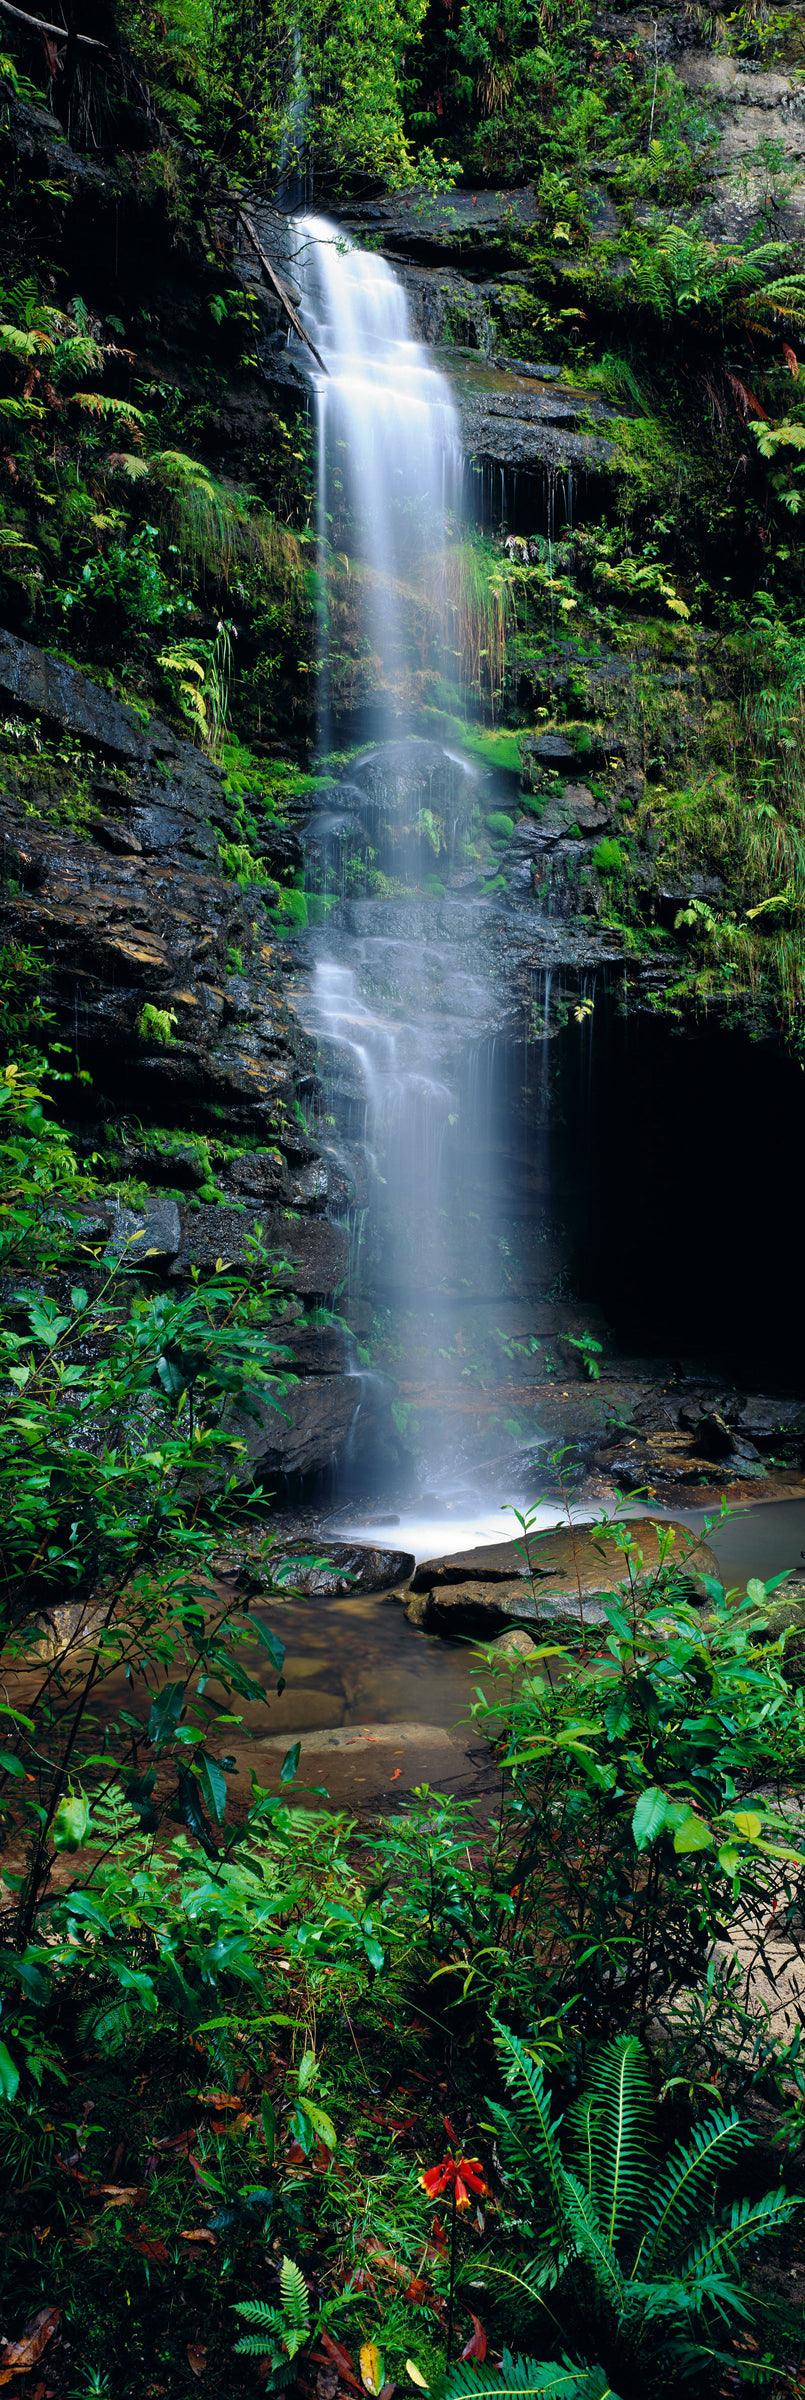 Tropical waterfall pouring into a river in the Blue Mountains National Park